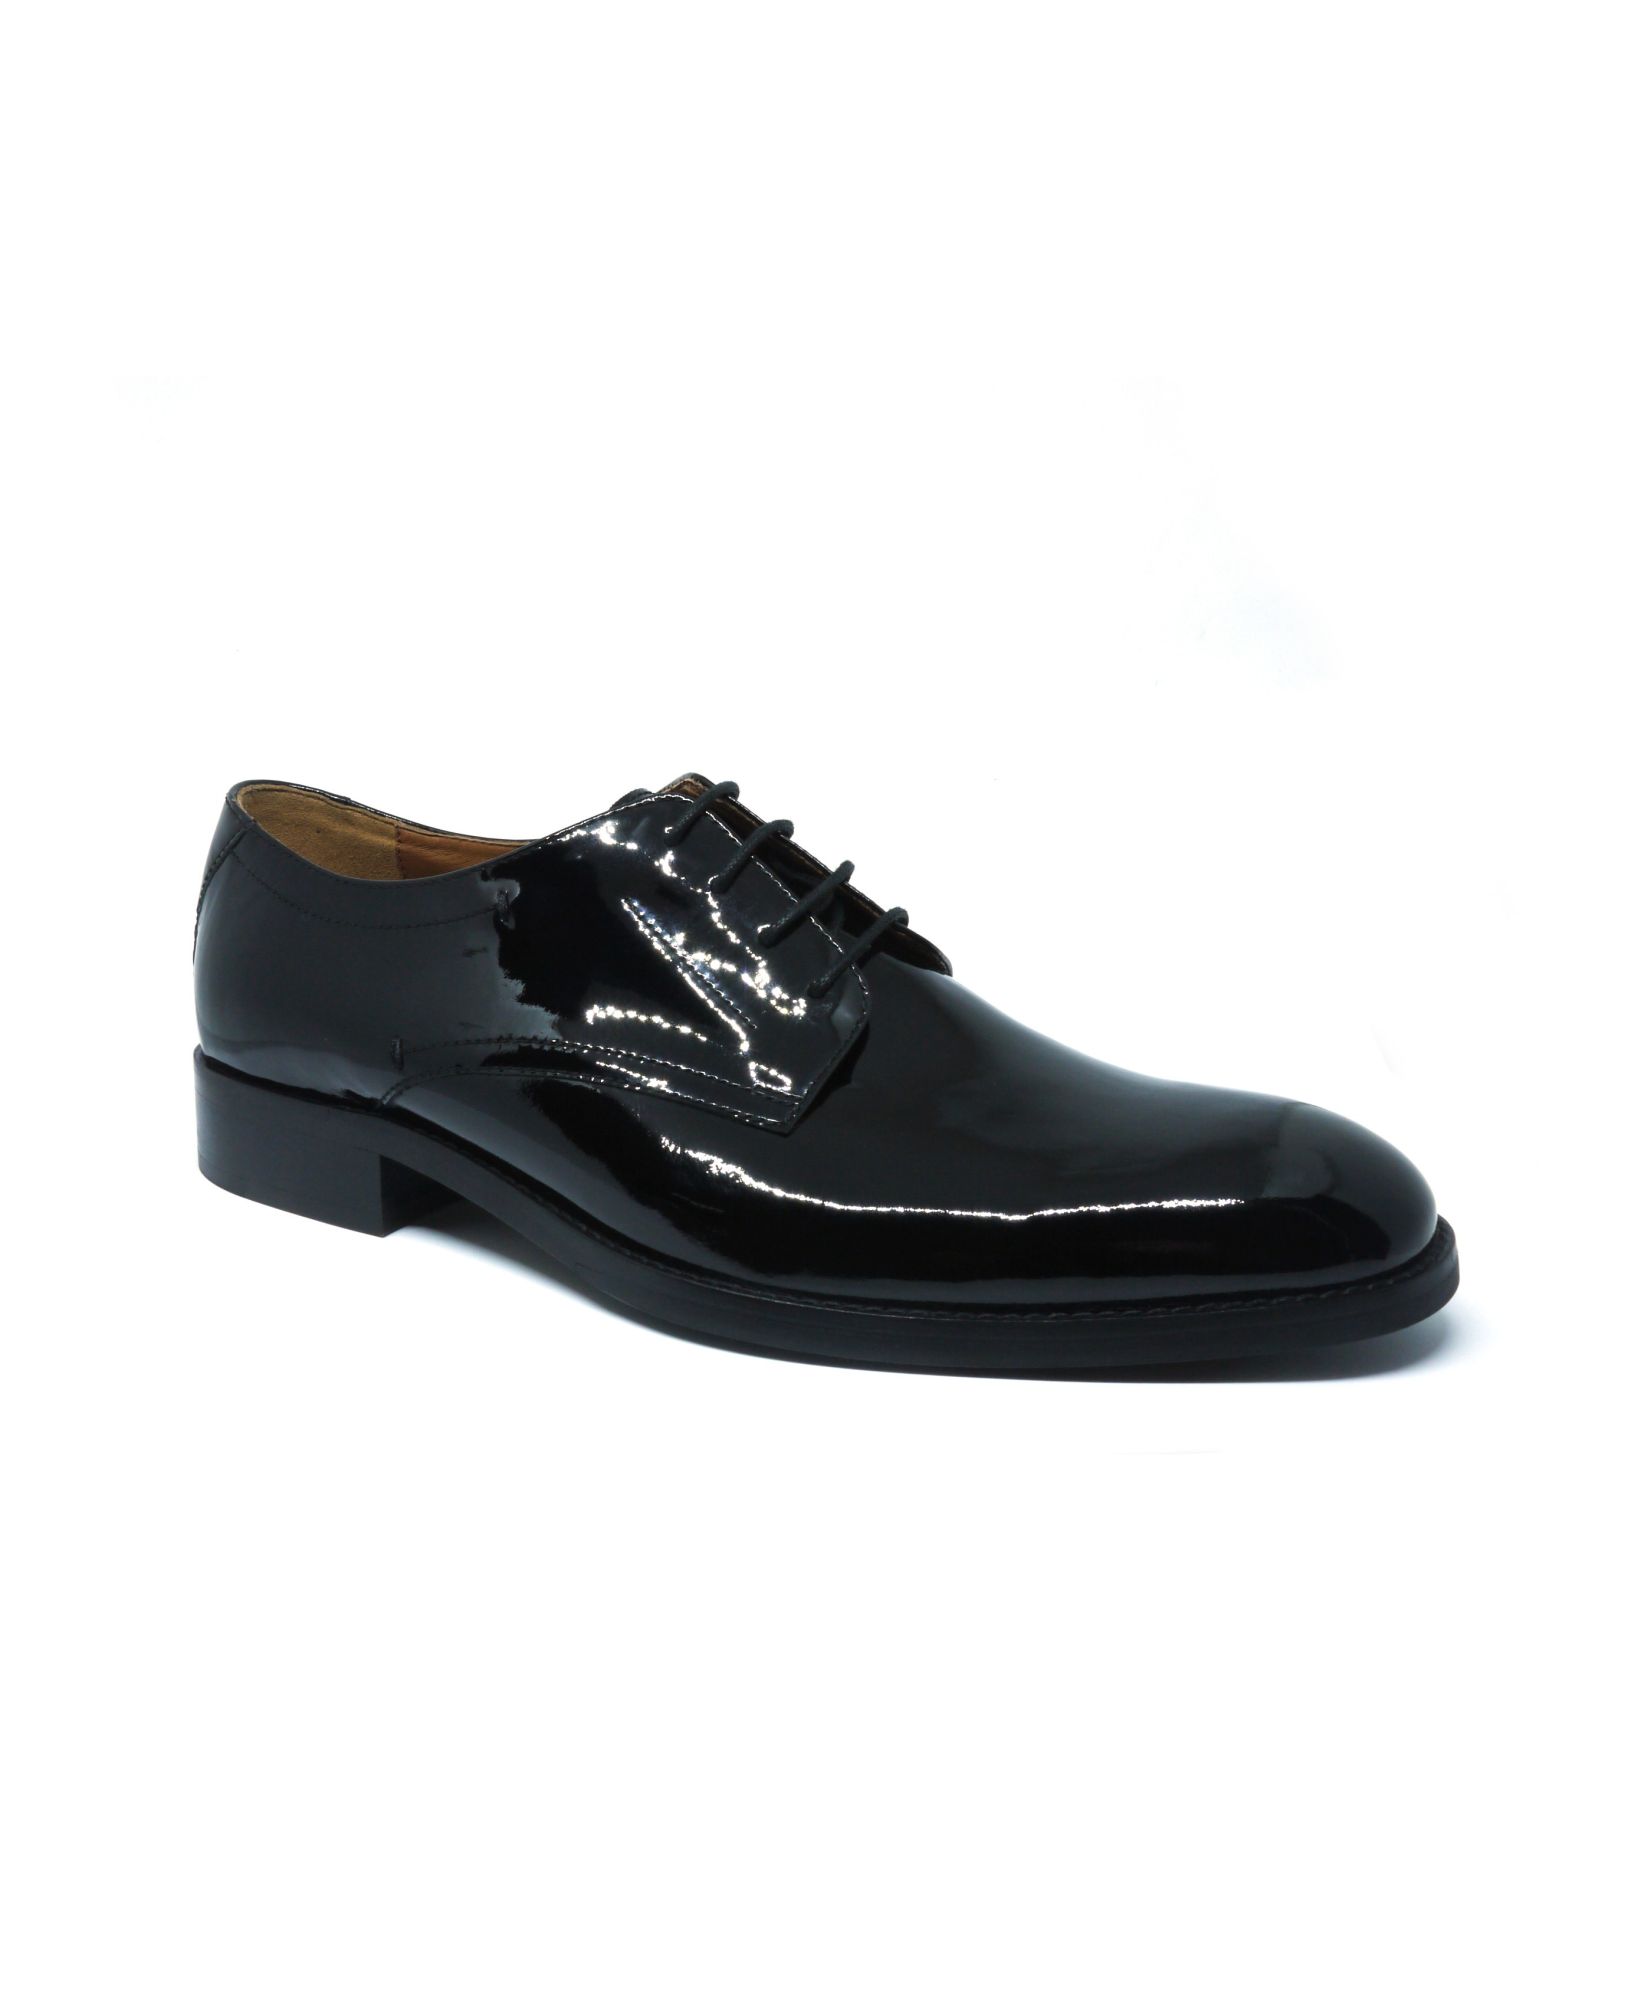 Black Patent Leather Derby Shoes 8